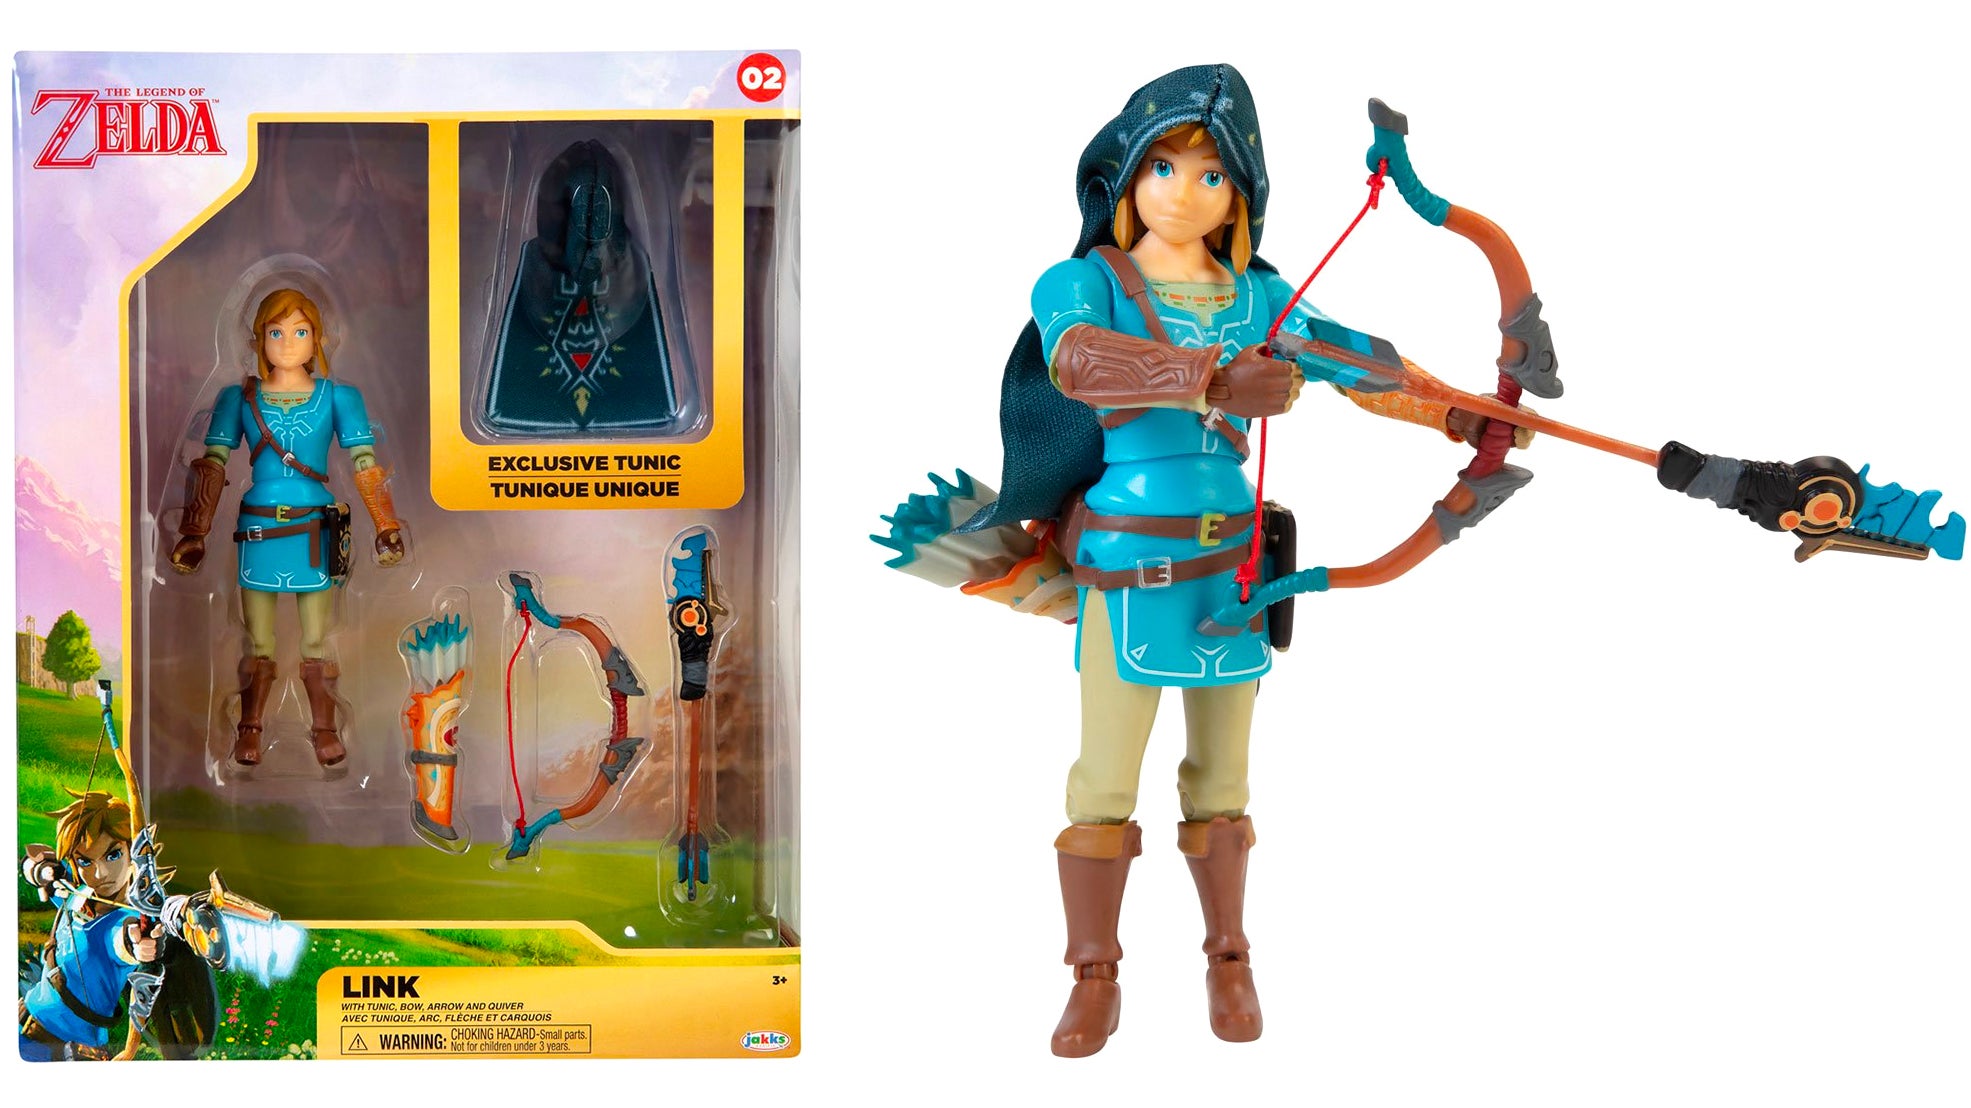 This Week’s Toy News Trembles Before the Gaze of Teeny Skeletor